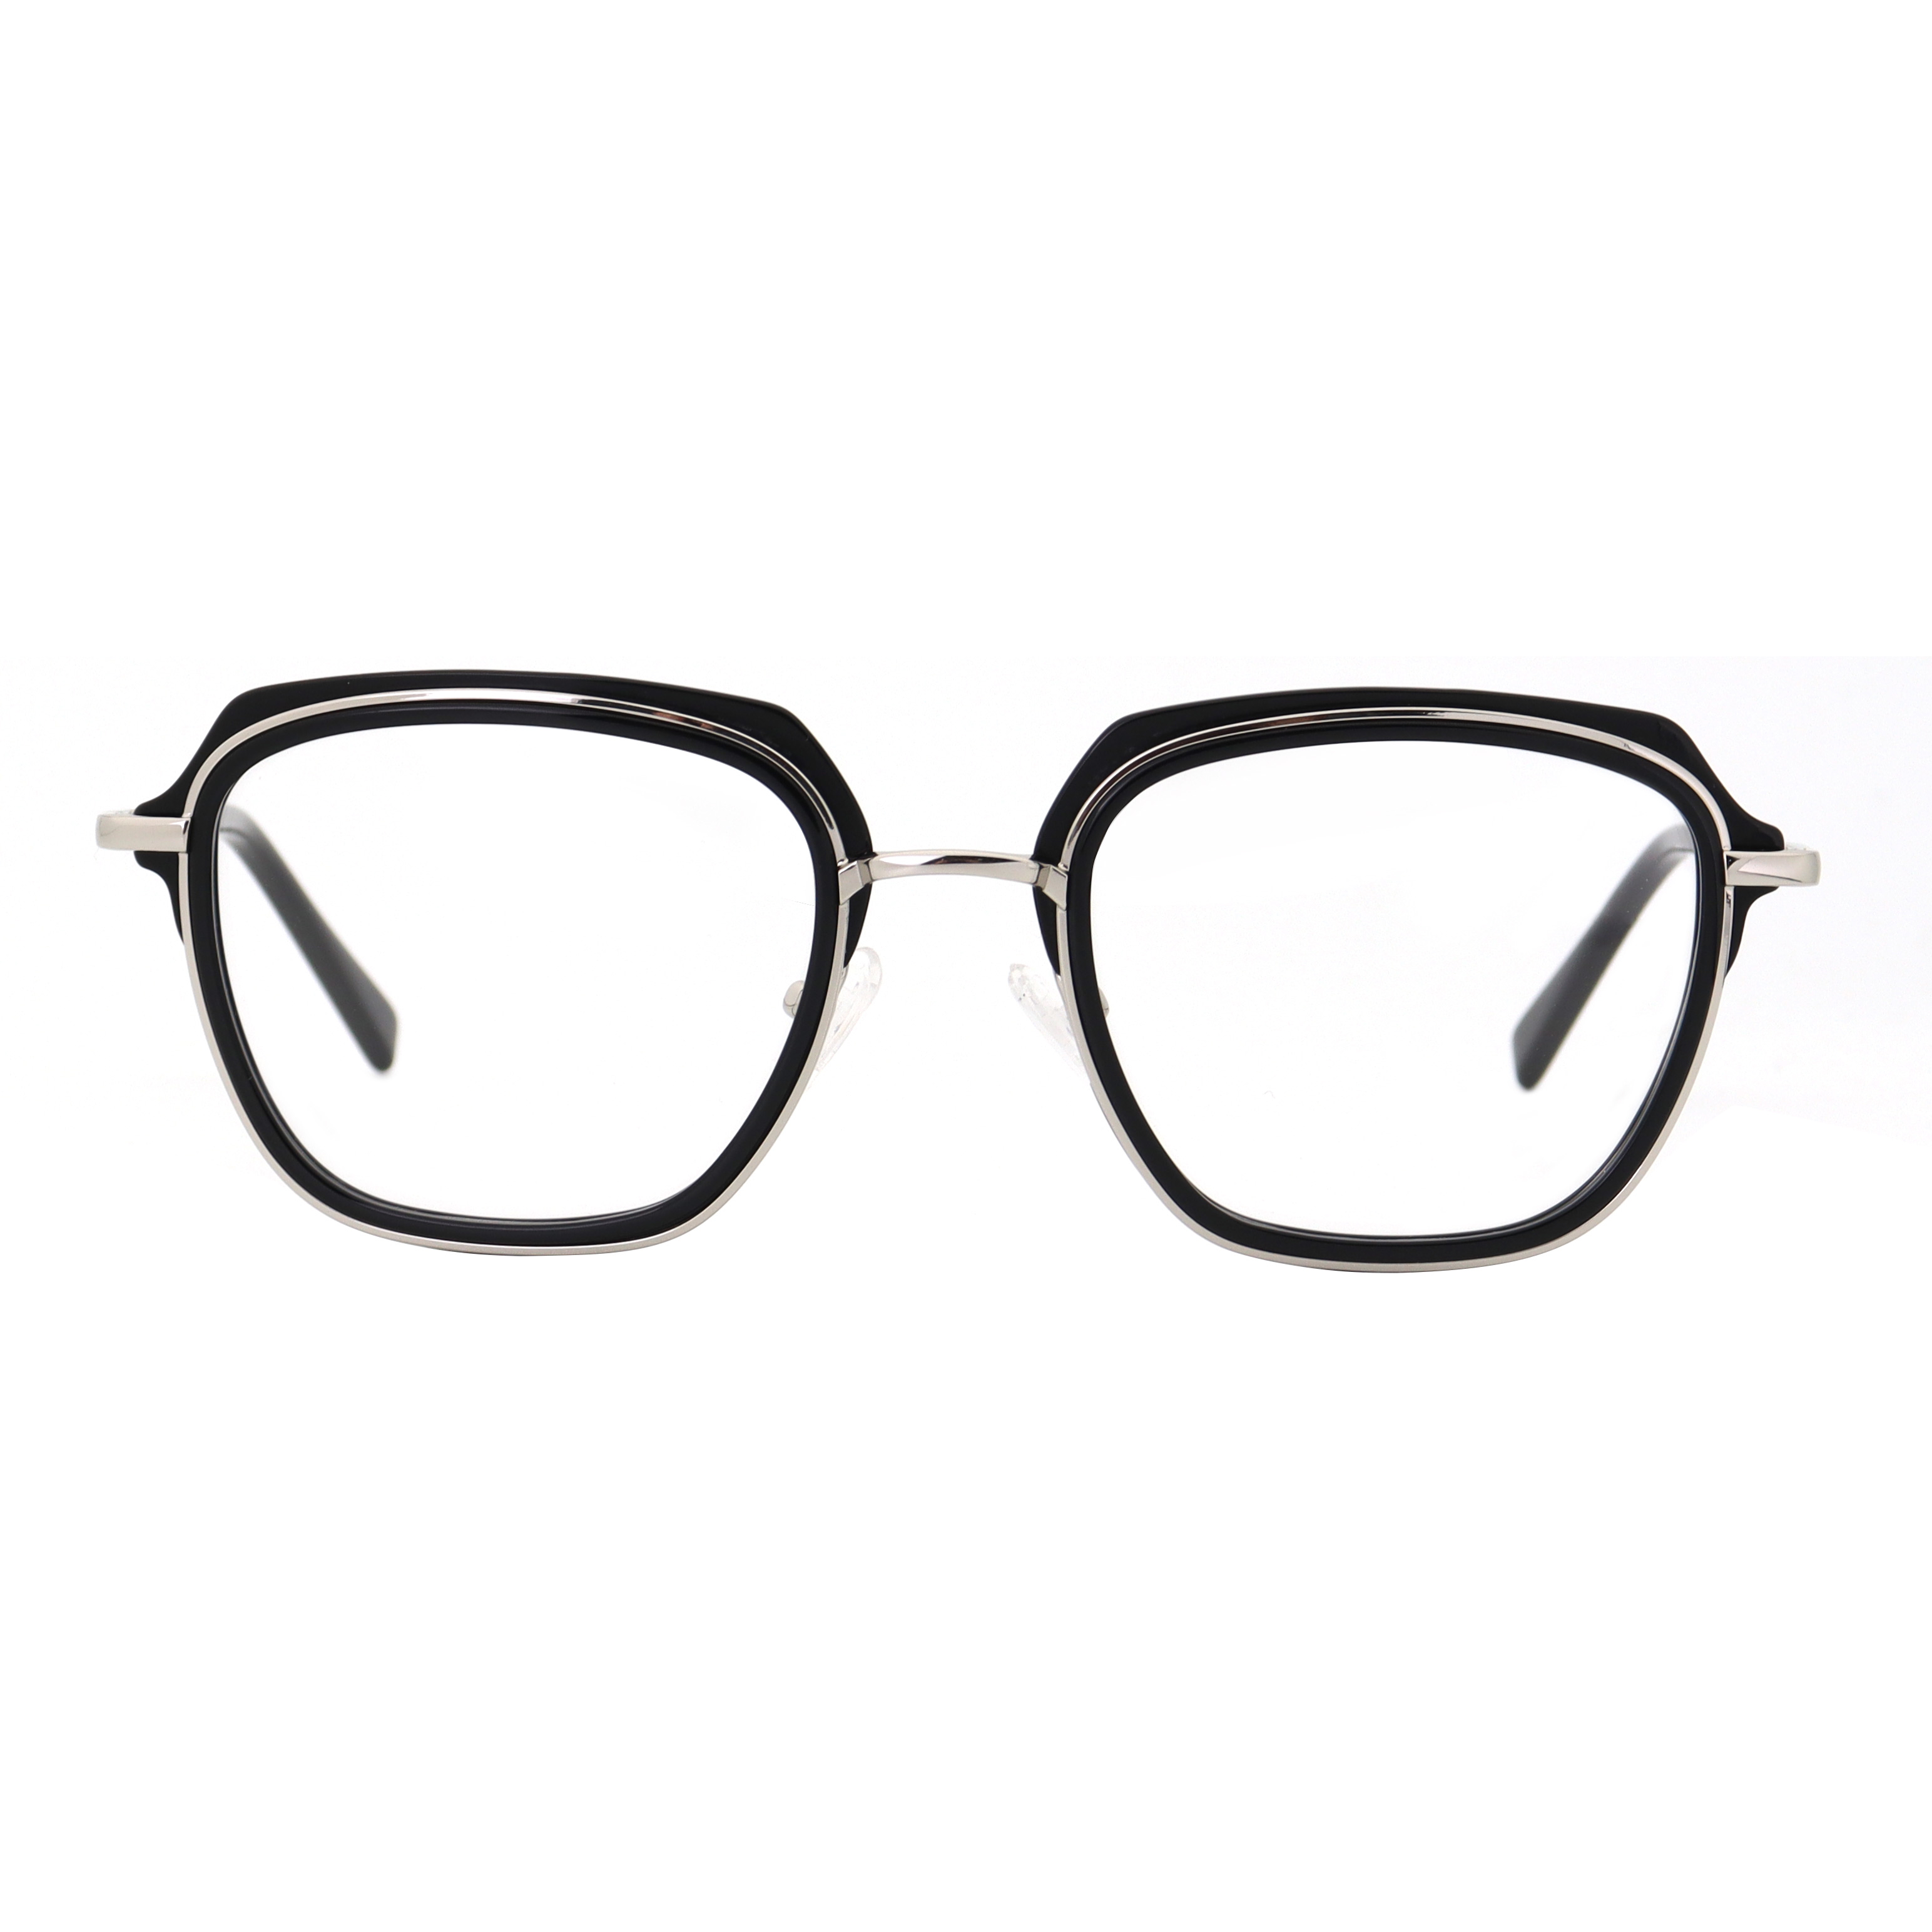 Fashion square shape eyewear in acetate and metal Featured Image